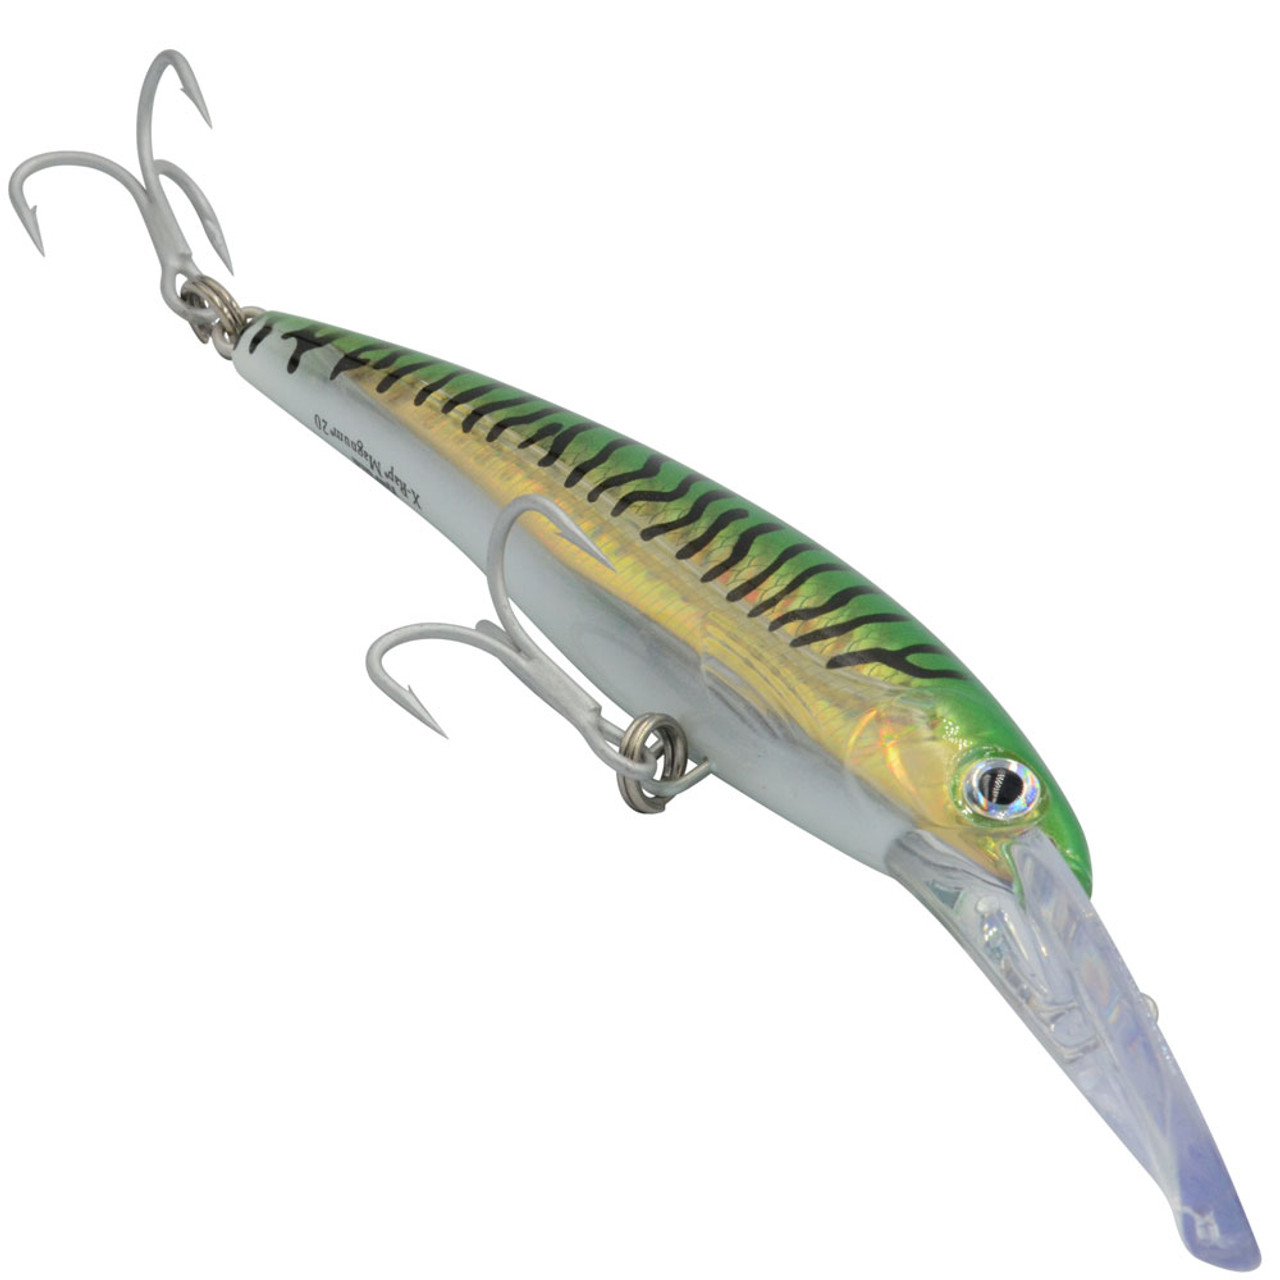 Buy ♥ New Arrivals Rapala X Rap 30 Magnum Fishing Lure for All the people  online